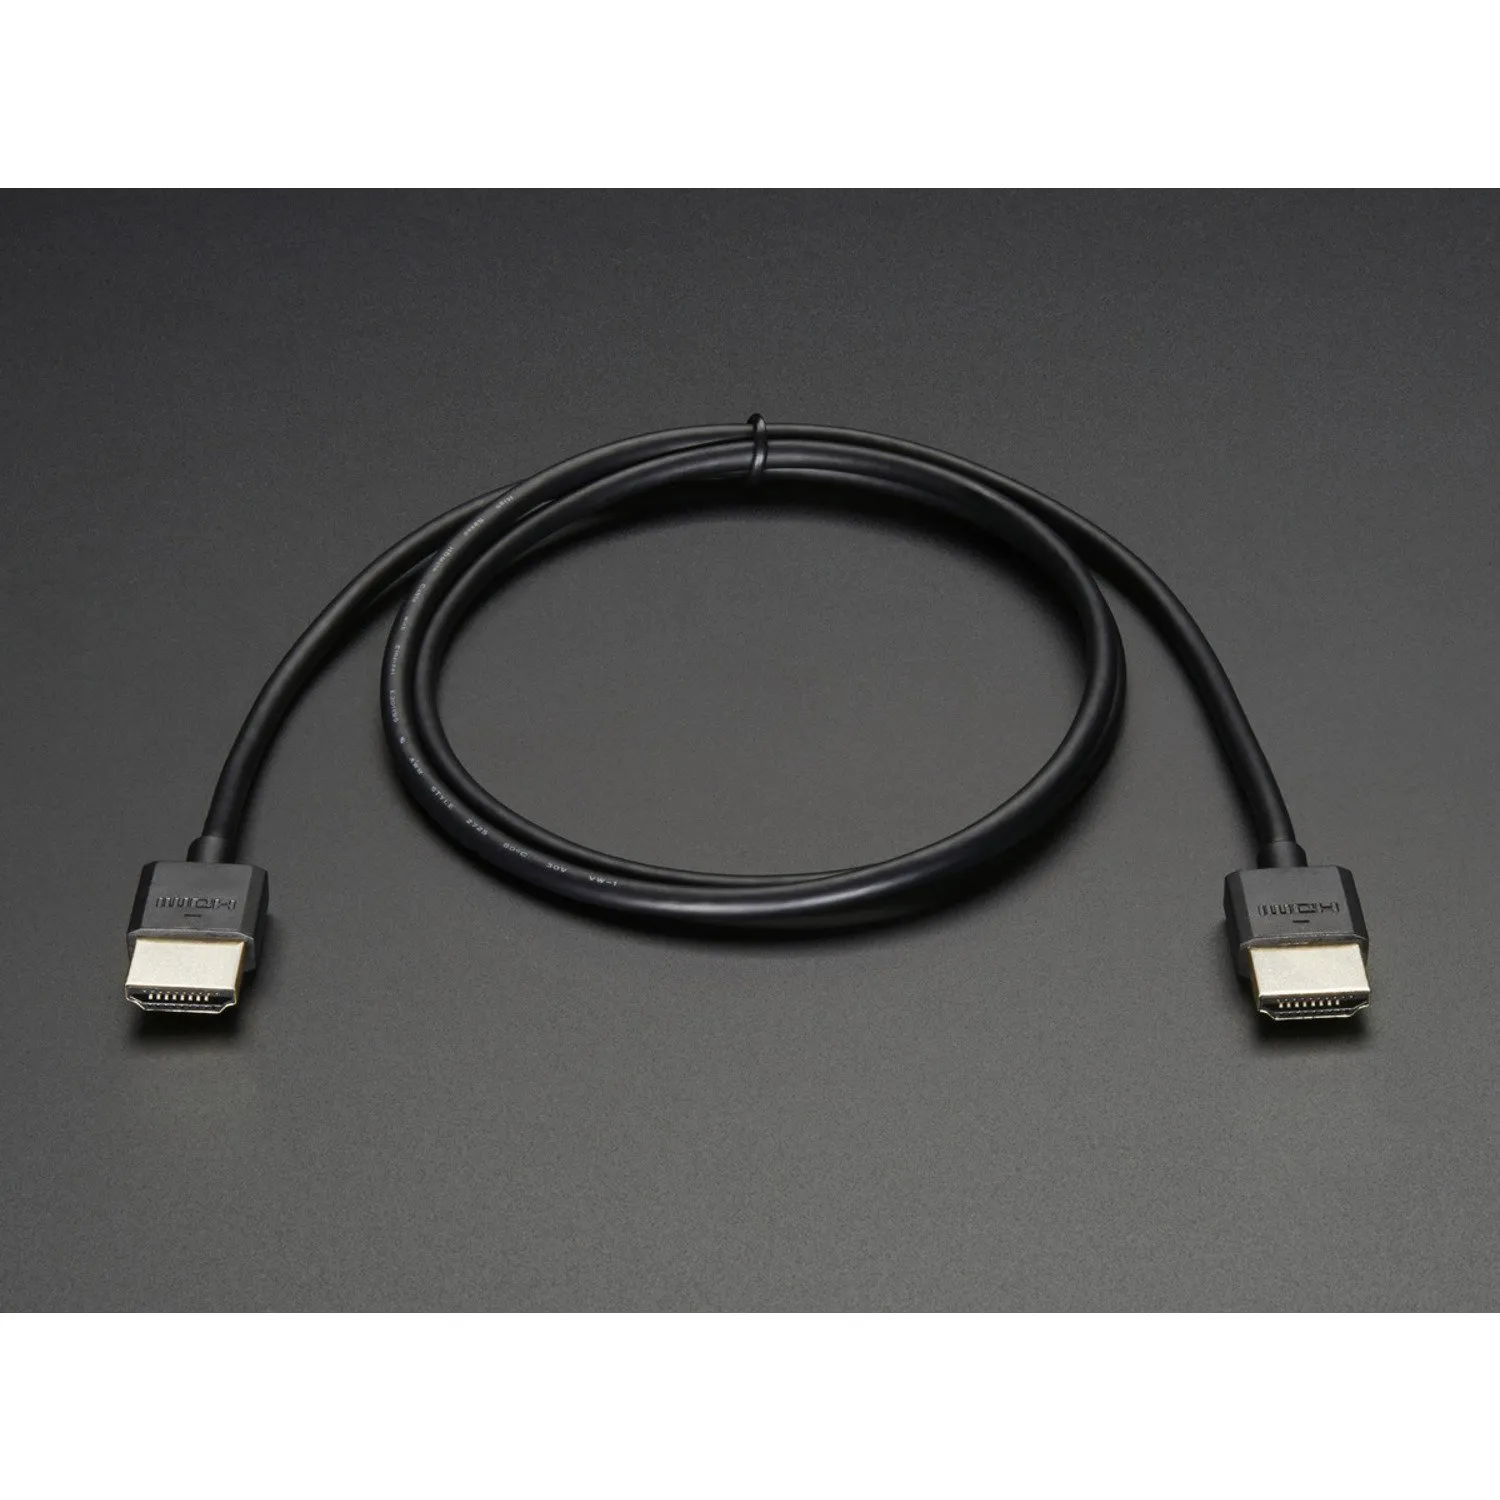 Photo of Slim HDMI Cable - 914mm / 3 feet long